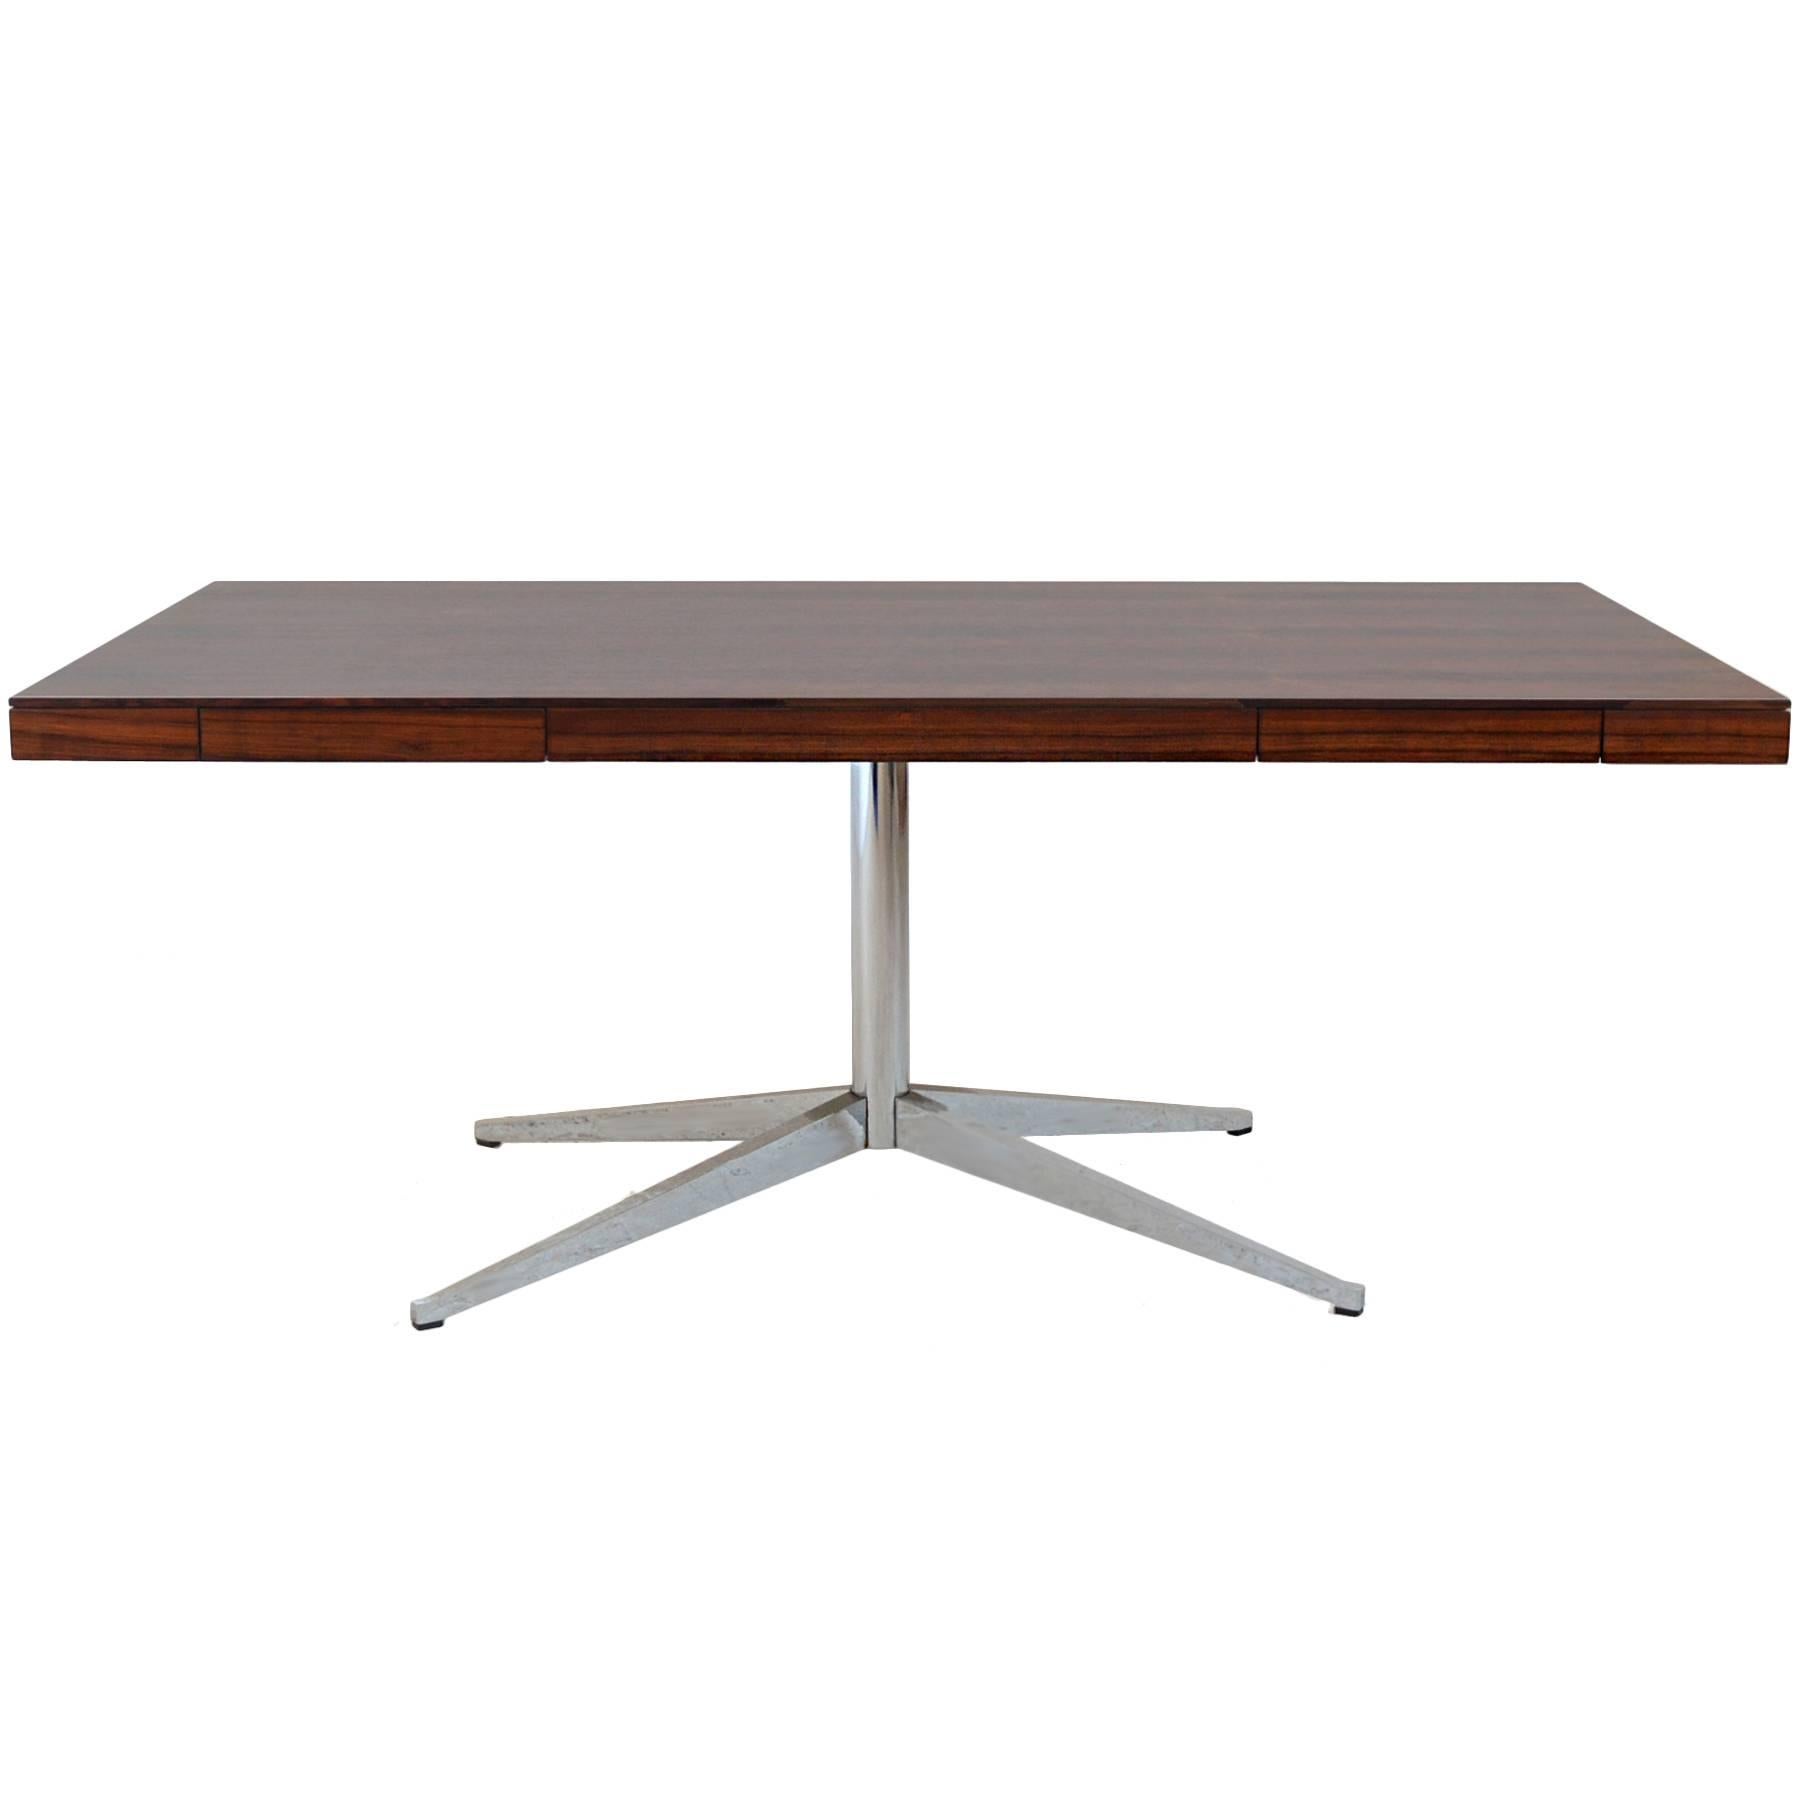 Florence Knoll Partner's Desk with Rosewood Top